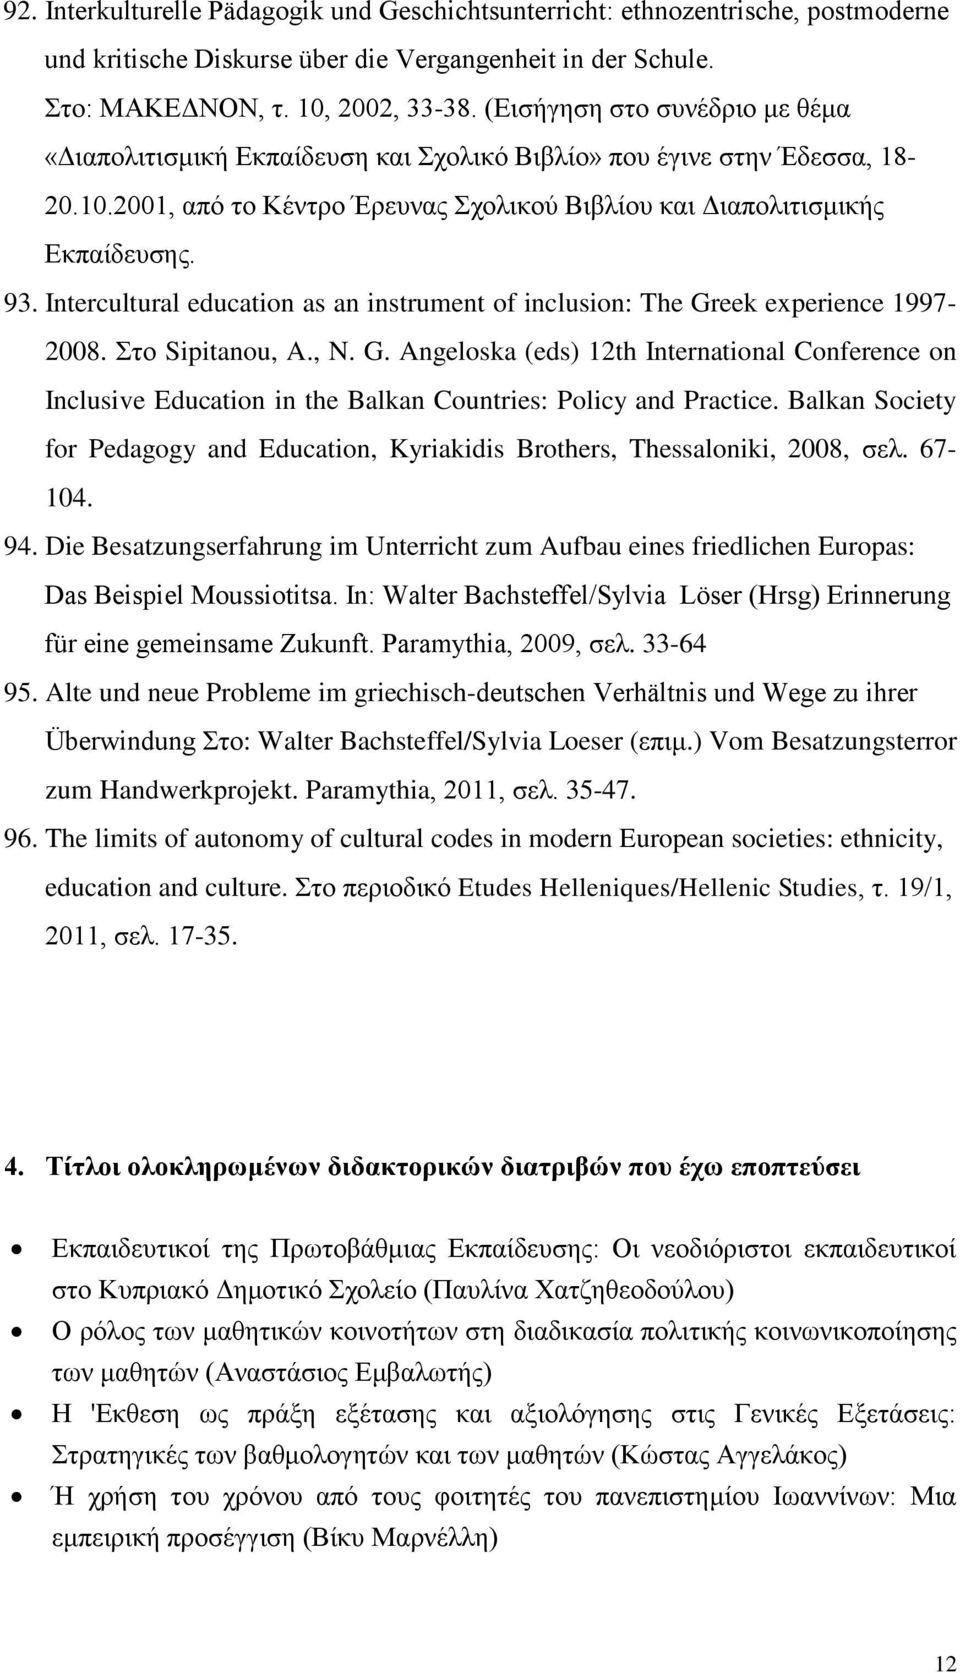 Intercultural education as an instrument of inclusion: The Greek experience 1997-2008. Στο Sipitanou, A., N. G. Angeloska (eds) 12th International Conference on Inclusive Education in the Balkan Countries: Policy and Practice.